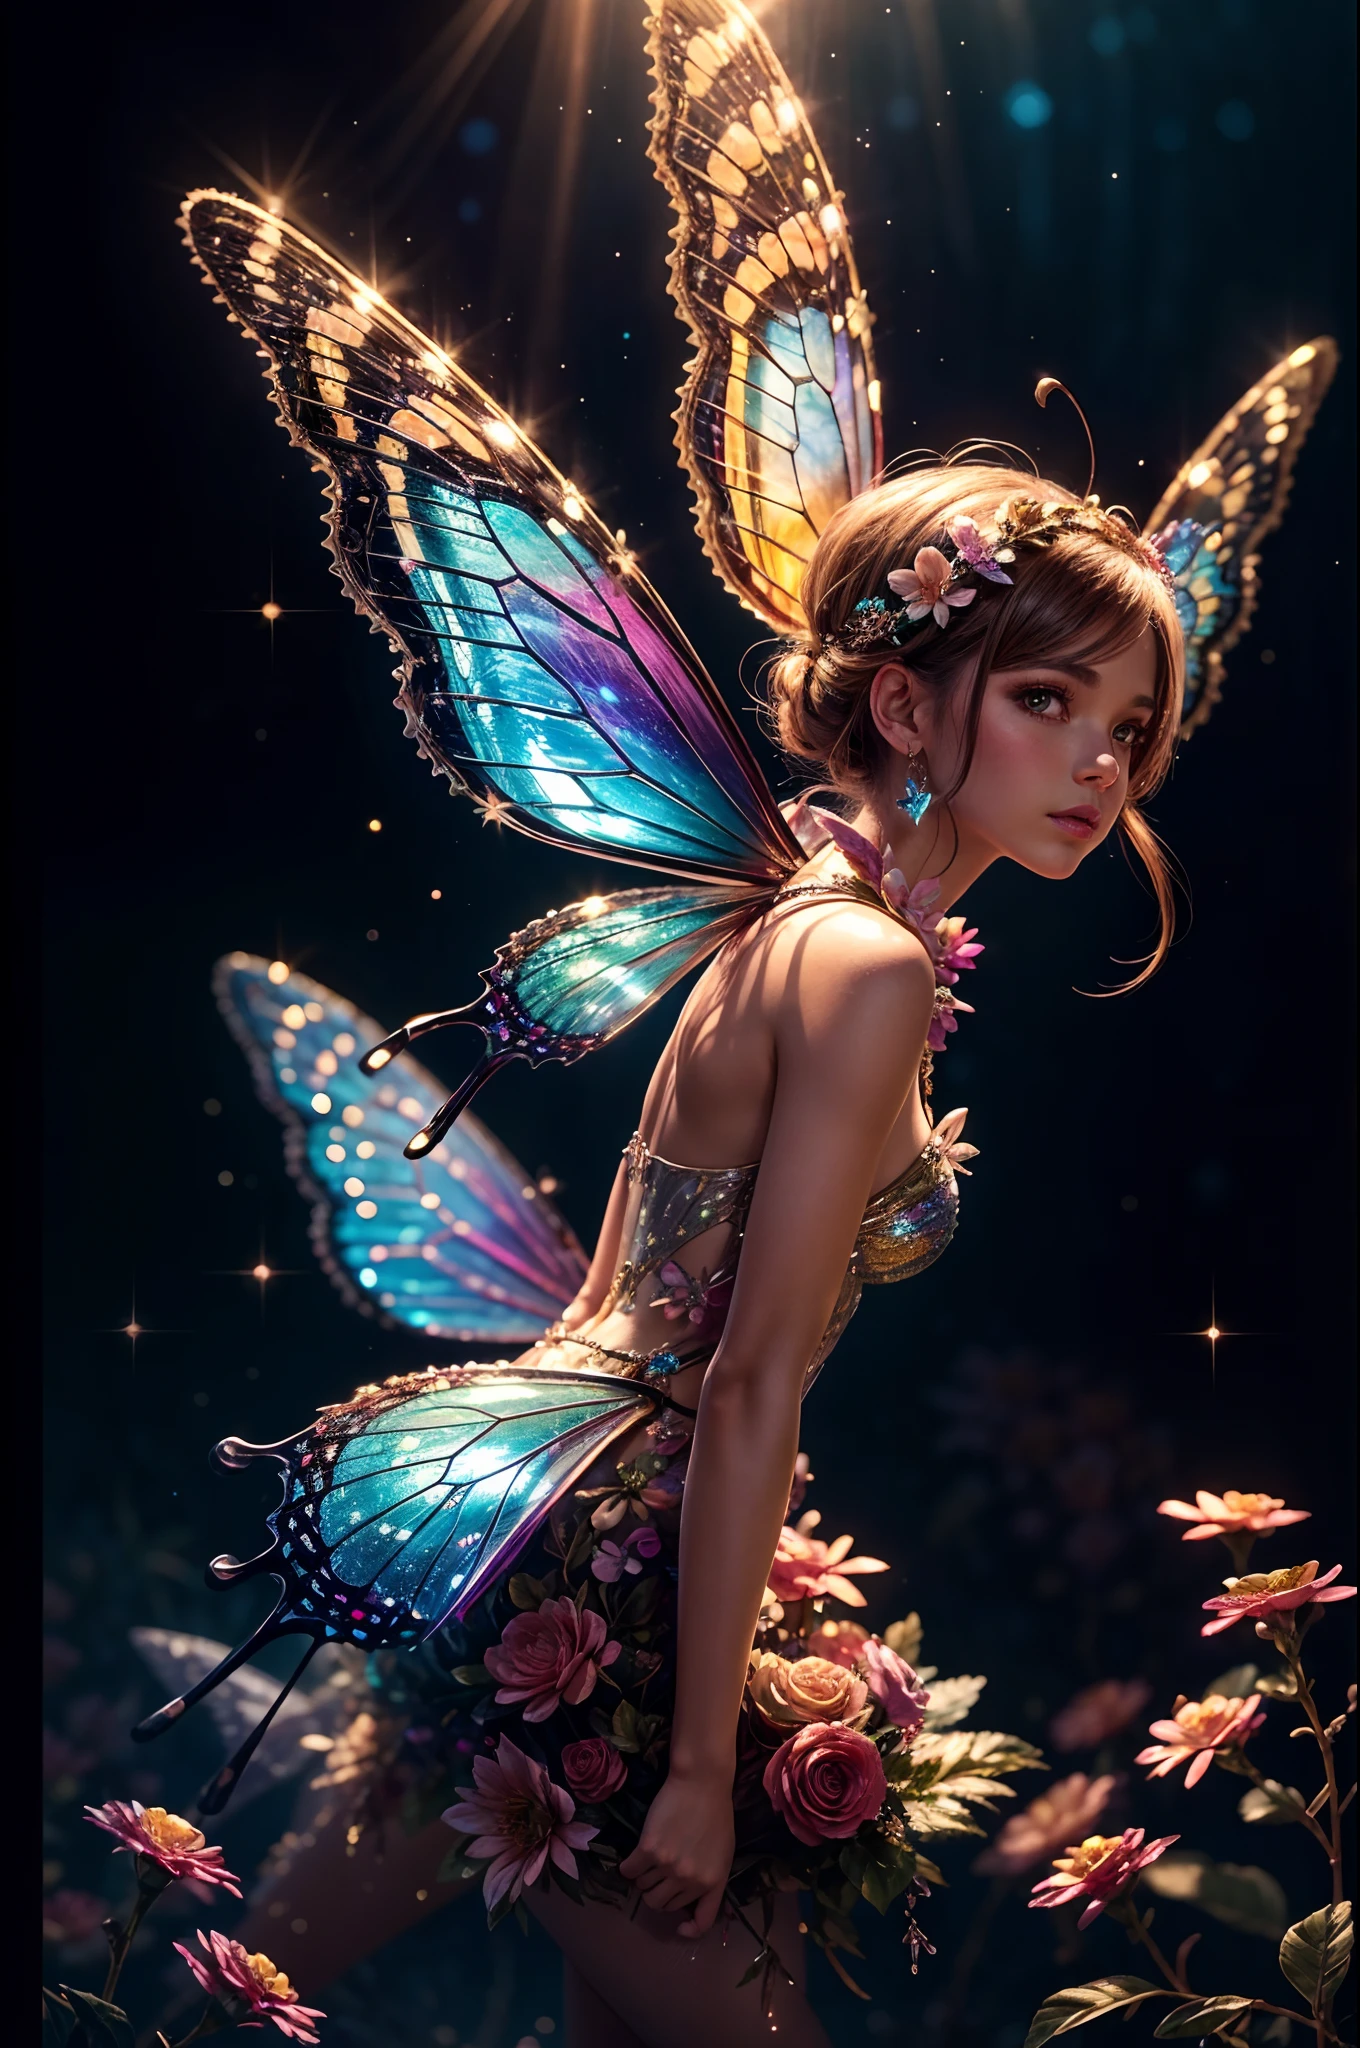 Close up,Flower fairy,crystal fairy, shiny butterfly wings,crystal blossom flower,
fantasy, galaxy, transparent, 
shimmering, sparkling, splendid, colorful, 
magical photography, dramatic lighting, photo realism, ultra-detailed, 4k, High-resolution